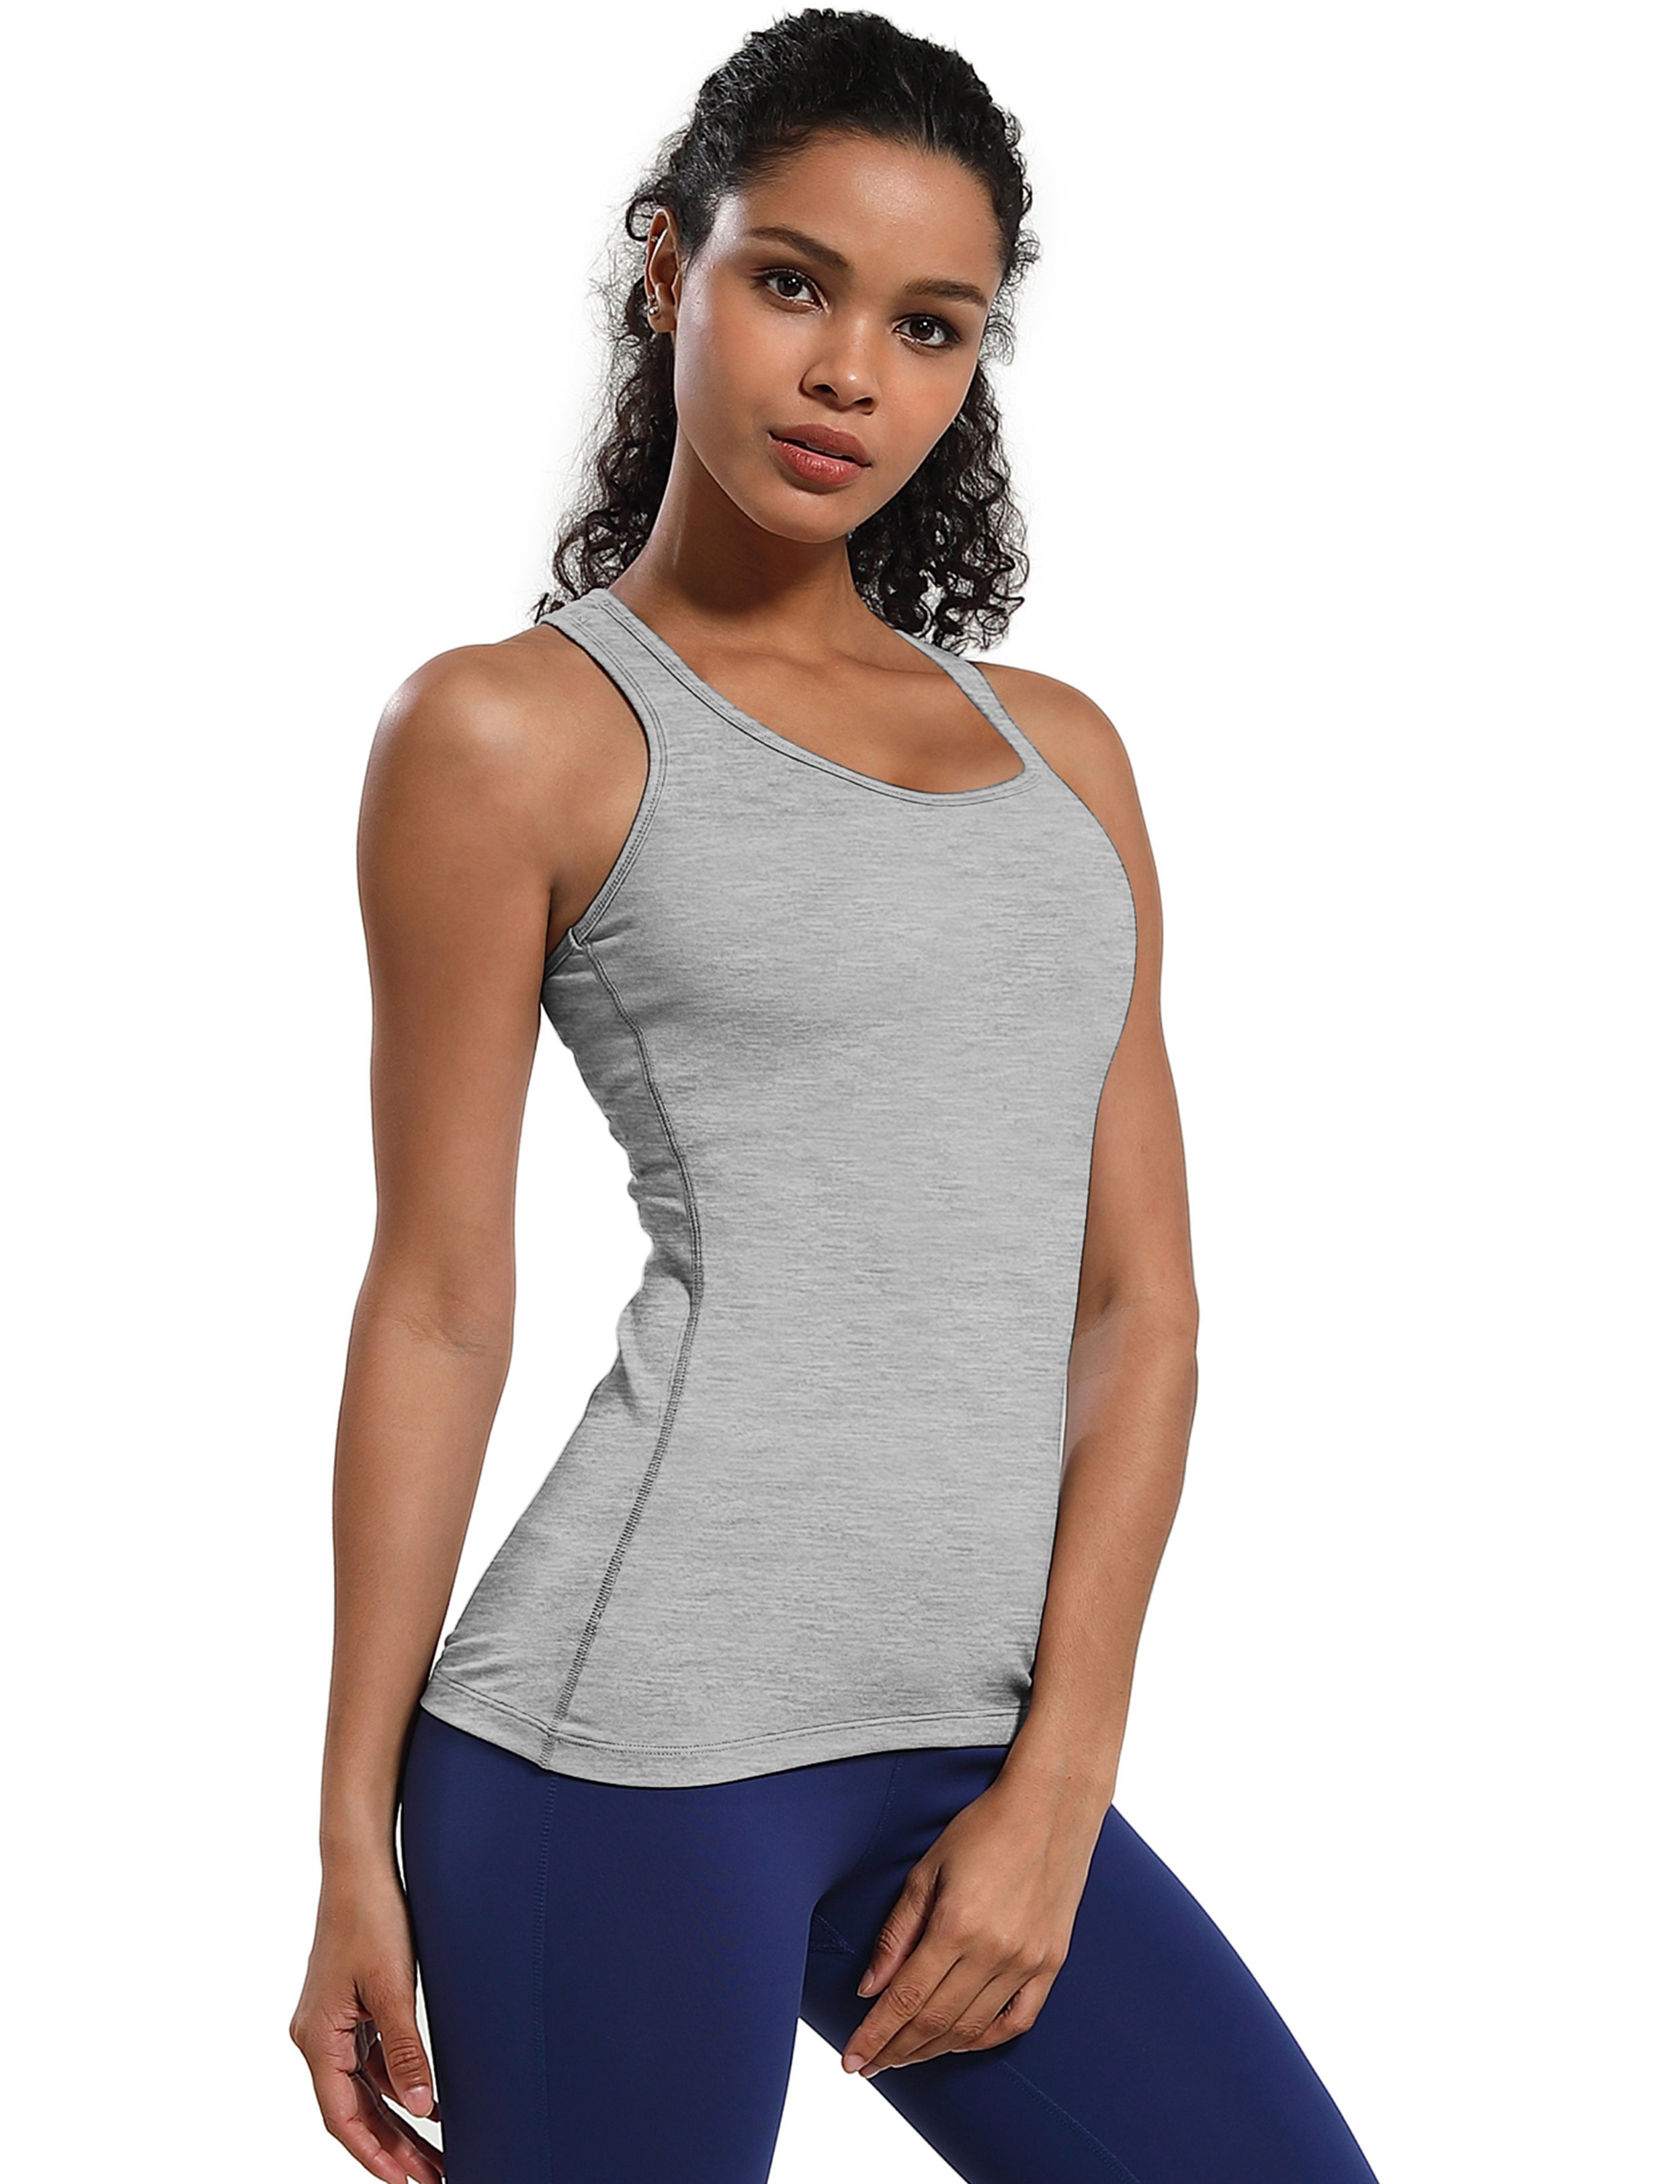 Racerback Athletic Tank Tops heathergray 92%Nylon/8%Spandex(Cotton Soft) Designed for Yoga Tight Fit So buttery soft, it feels weightless Sweat-wicking Four-way stretch Breathable Contours your body Sits below the waistband for moderate, everyday coverage